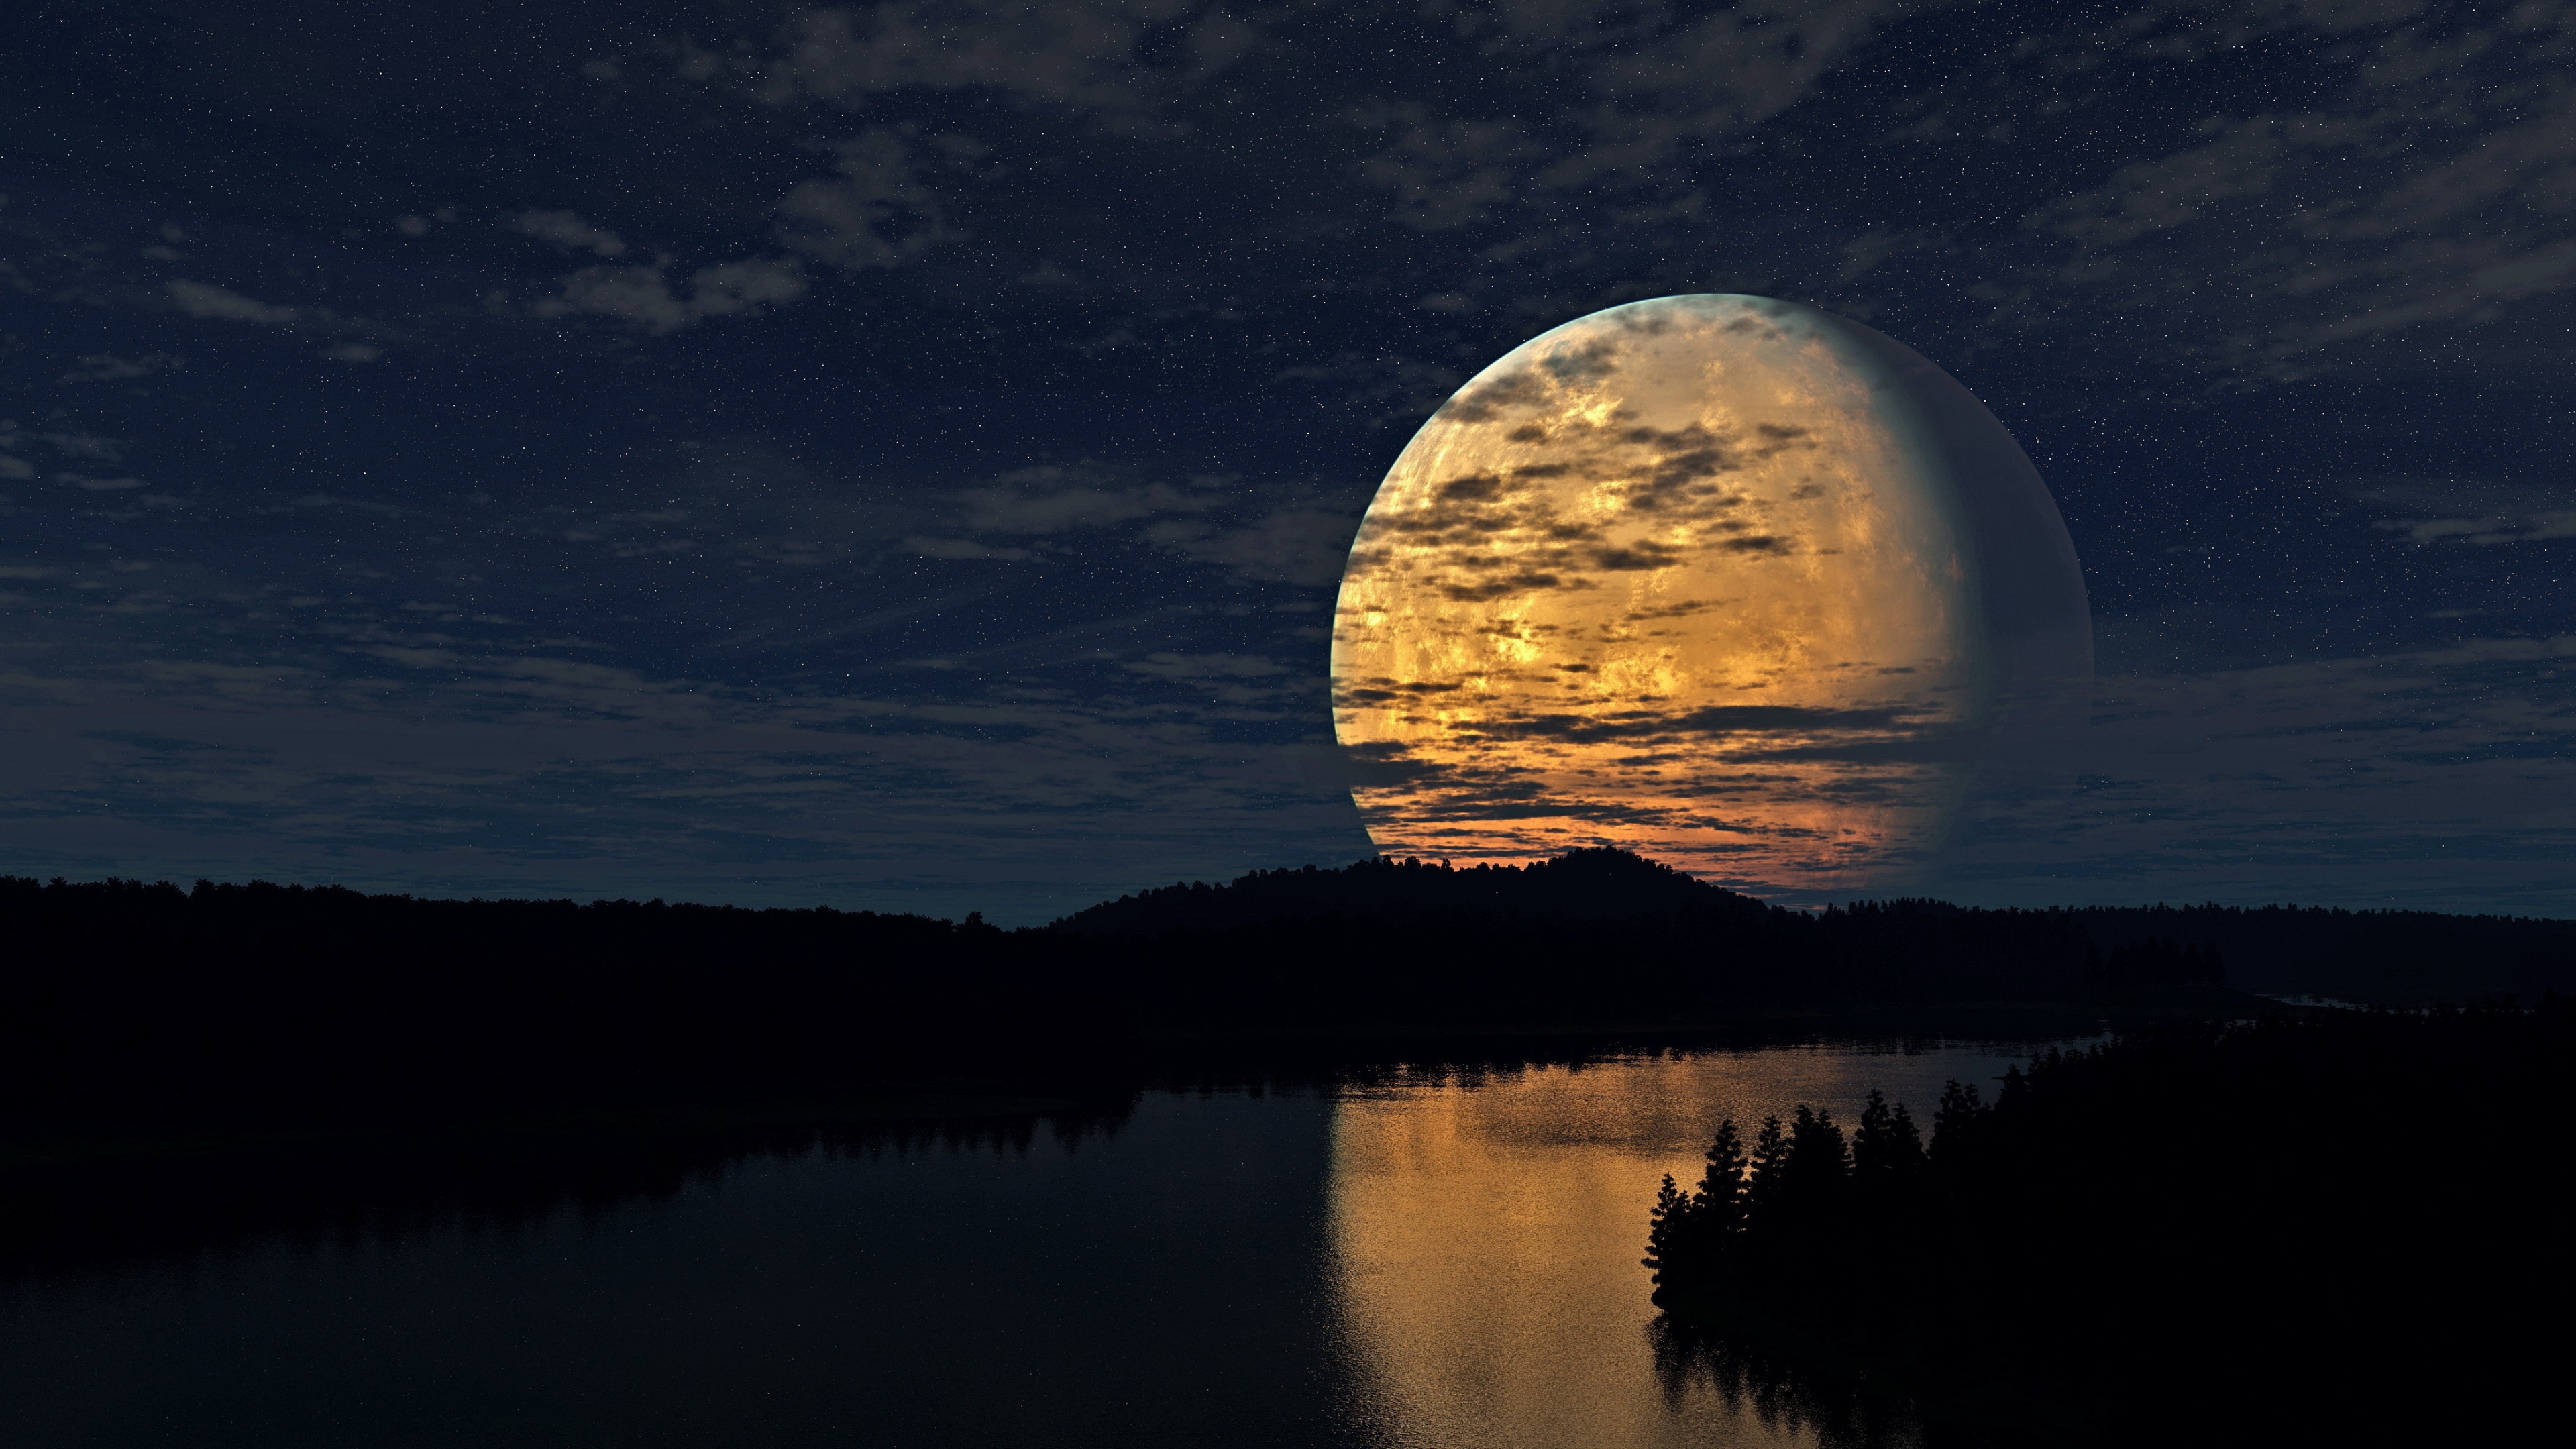  Night Sky Moon Trees River Reflection Wallpaper Background 4K